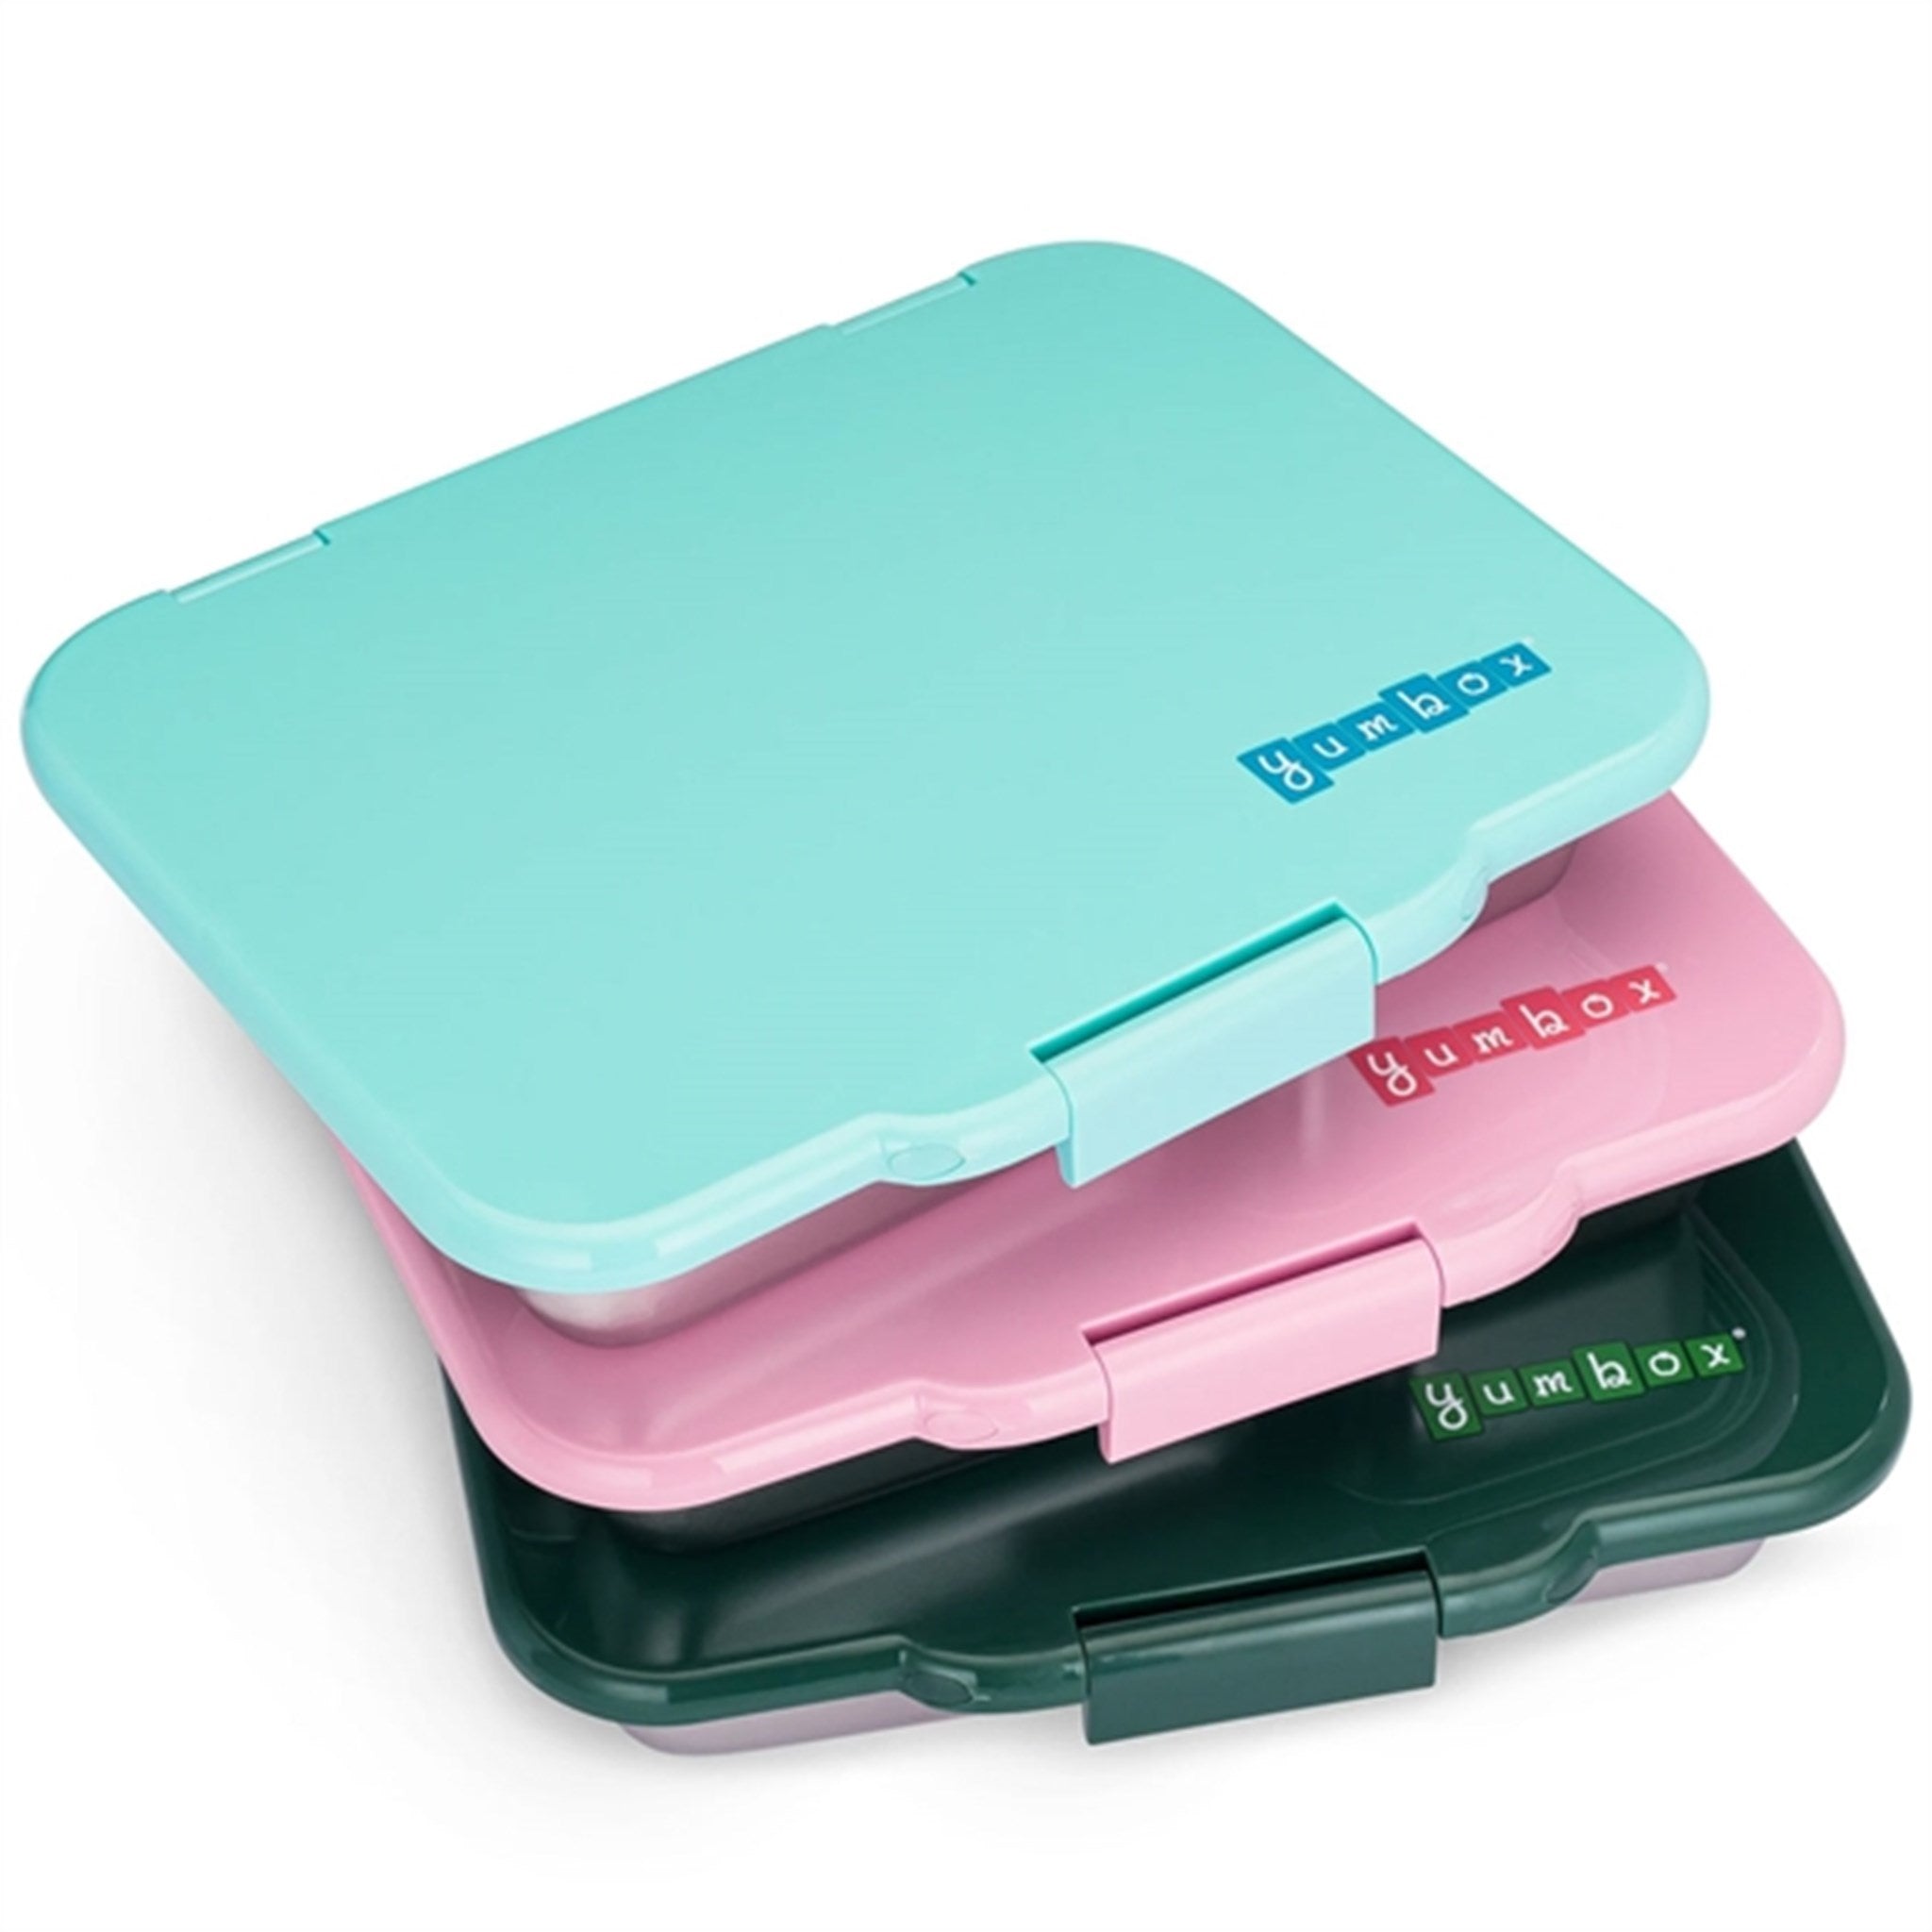 Yumbox Presto Stainless Steel Lunch Box Kale Green 7